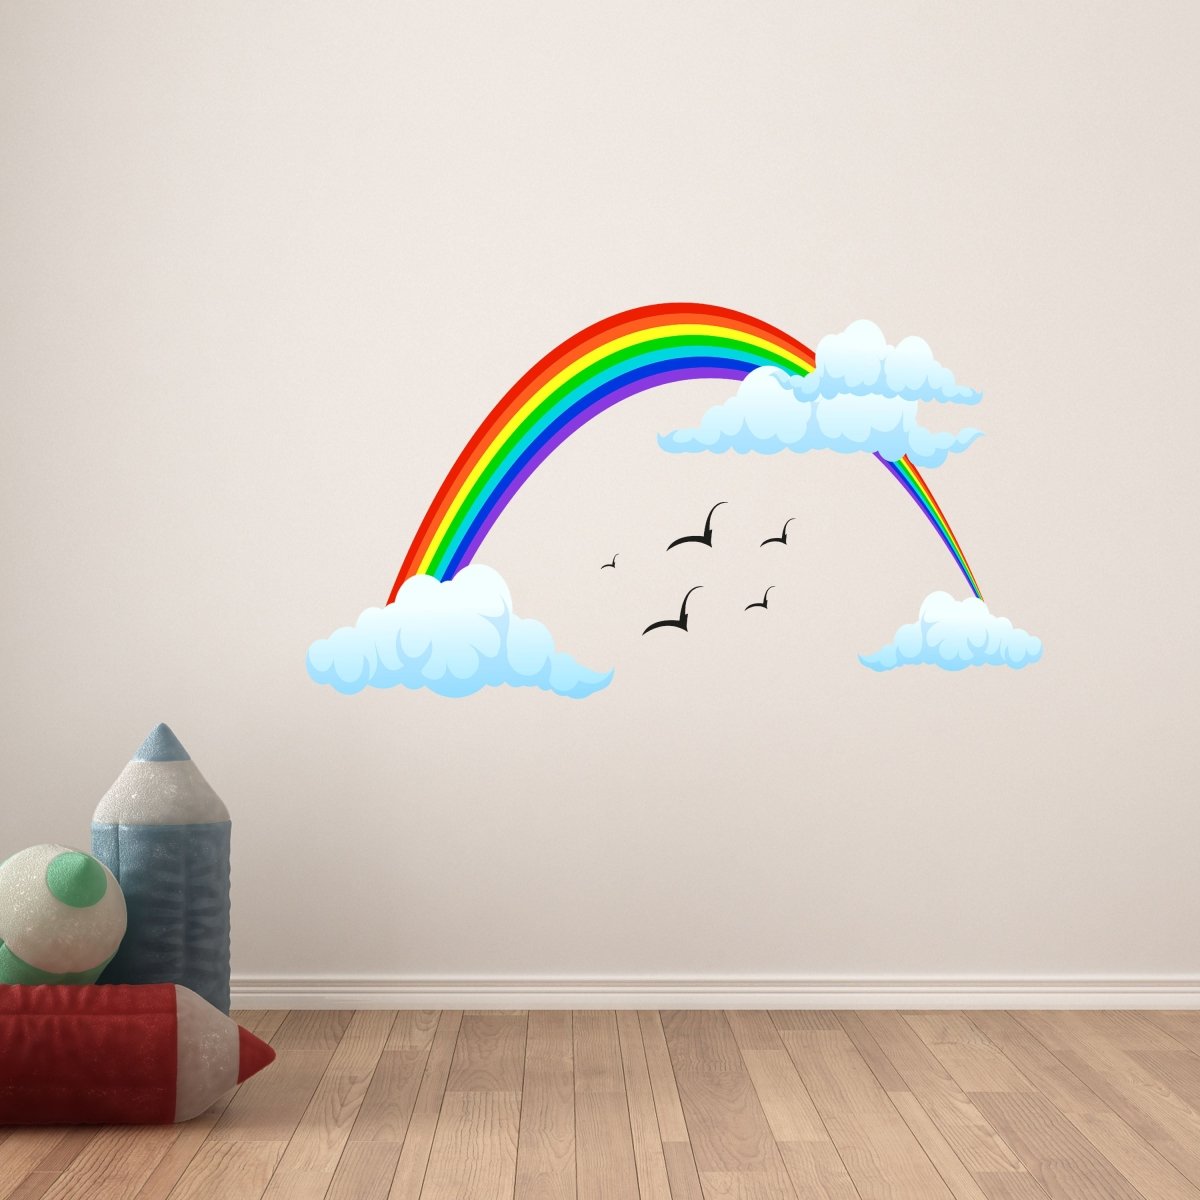 Discover stickers colorful WS00000059 birds, clouds, rainbow, wall sky